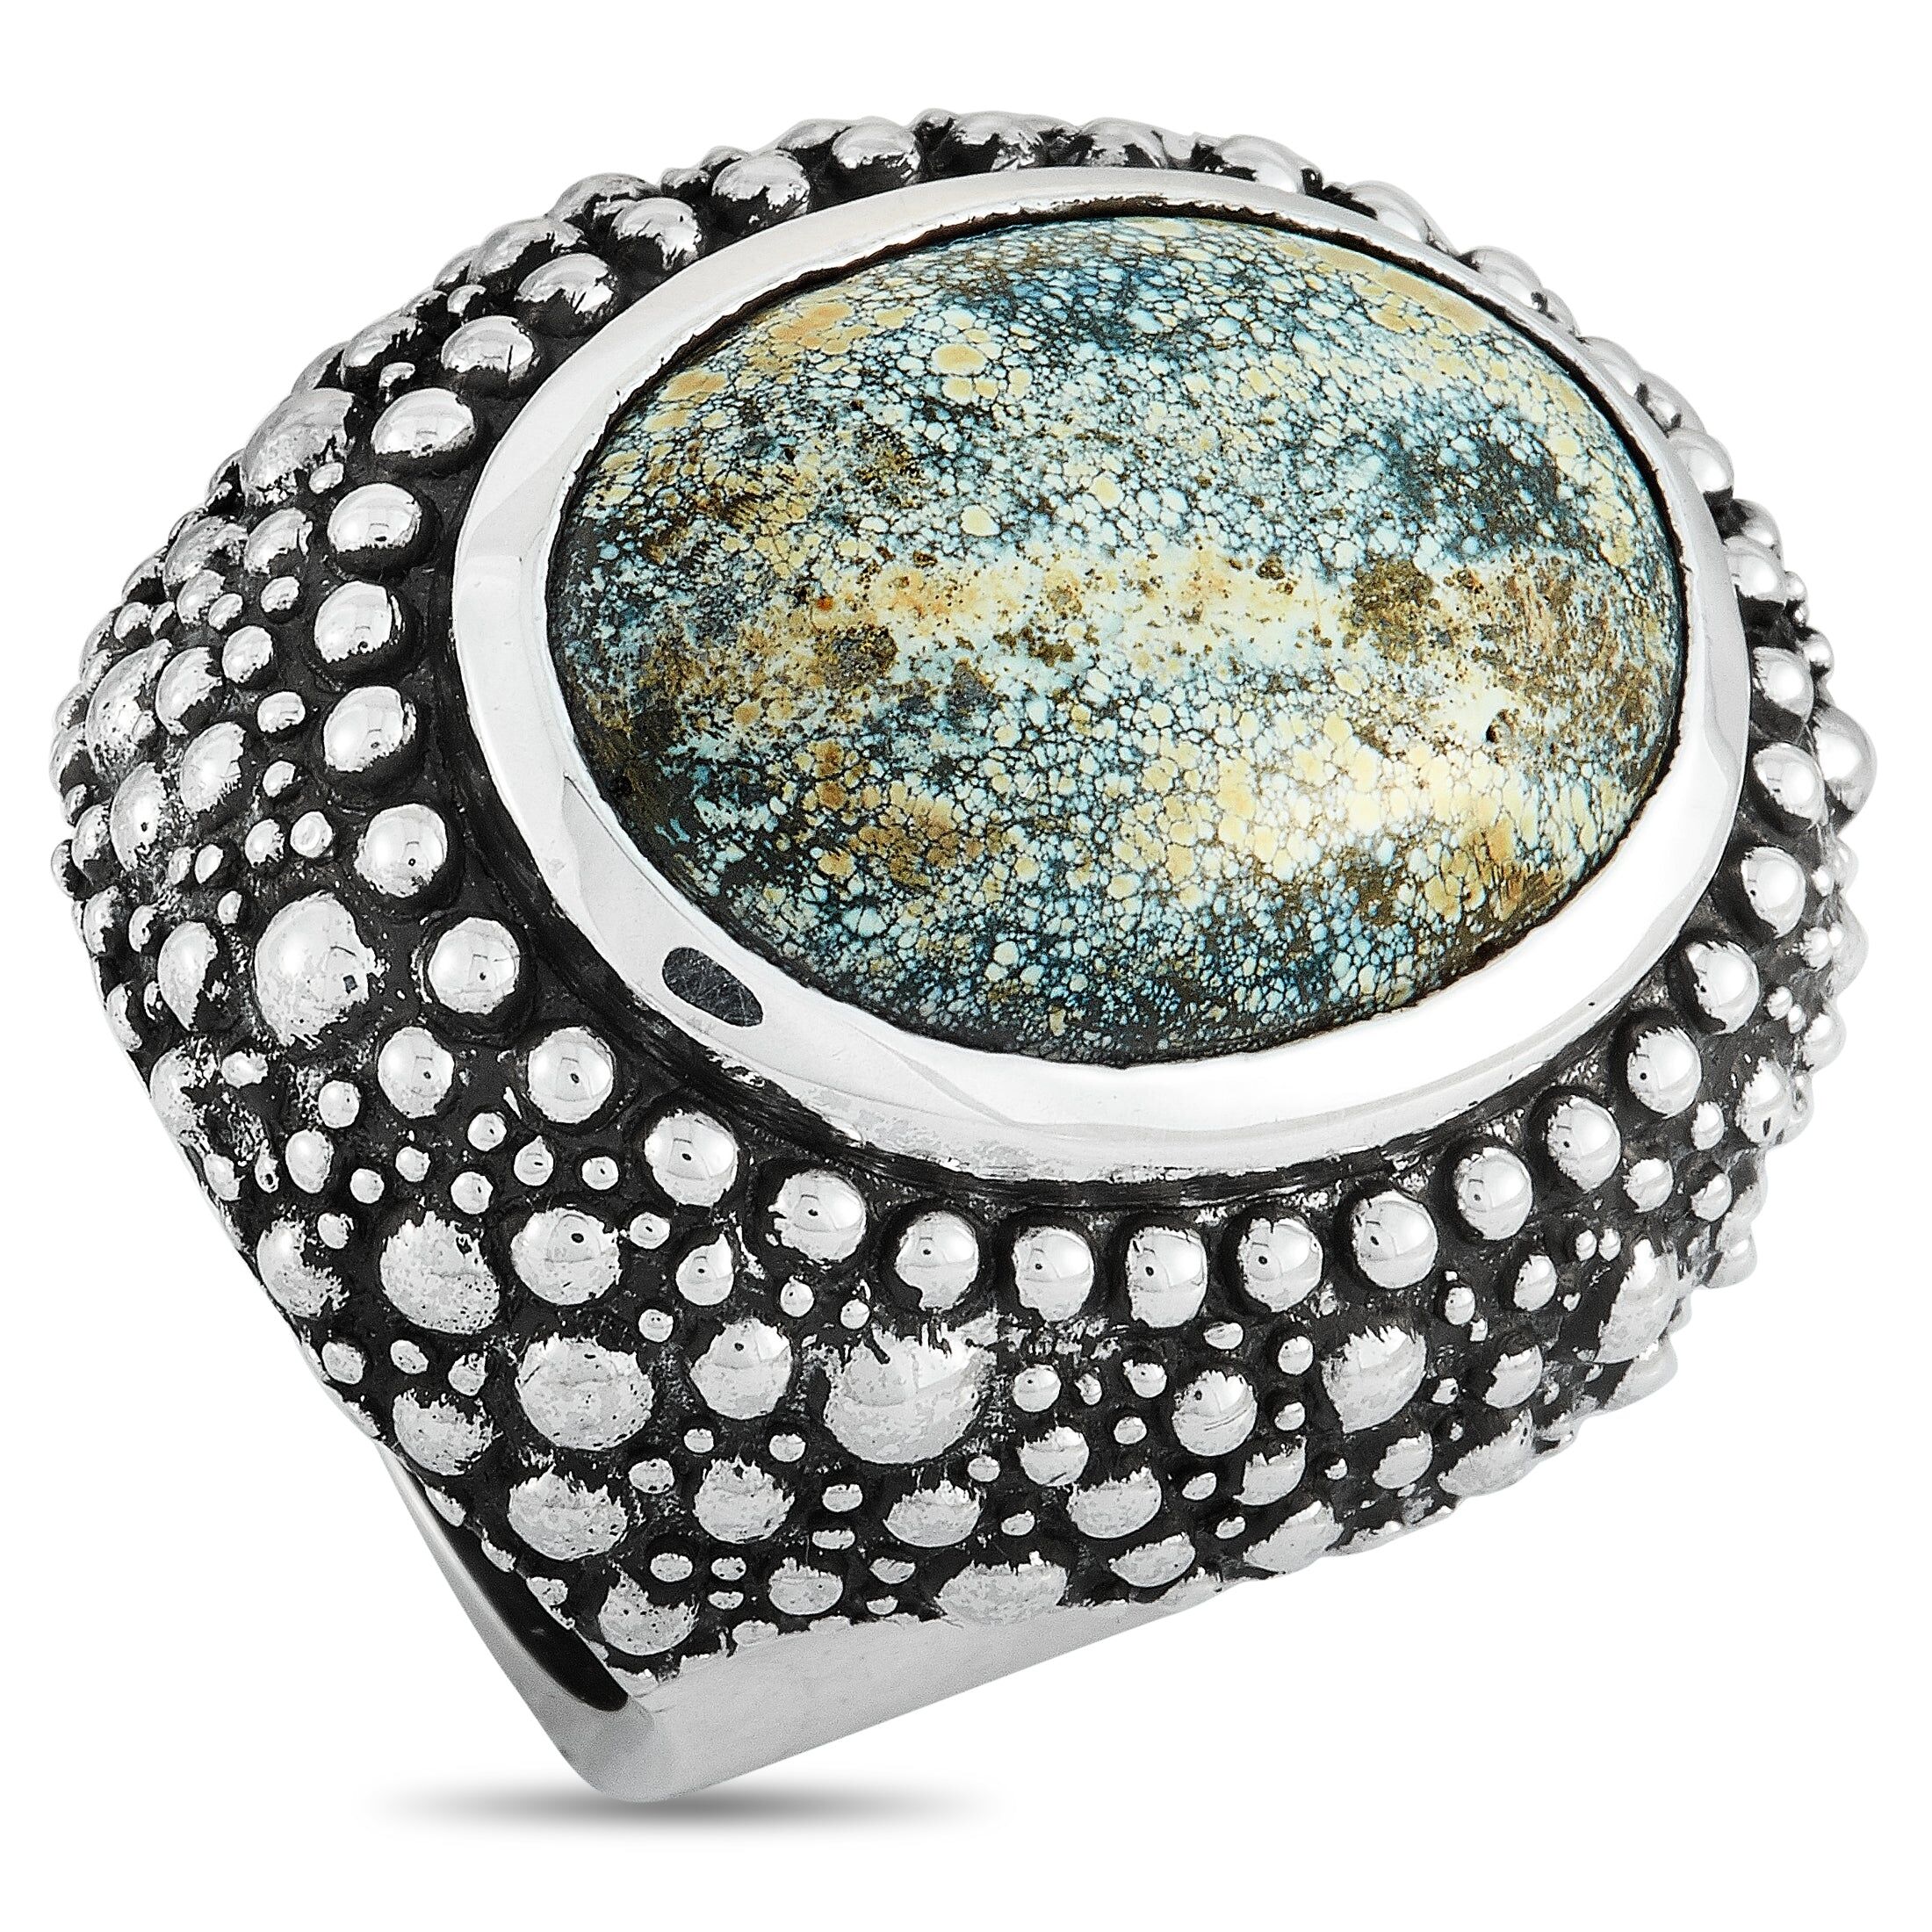 King Baby Silver and Spotted Turquoise Beaded Texture Ring US 9.5 female